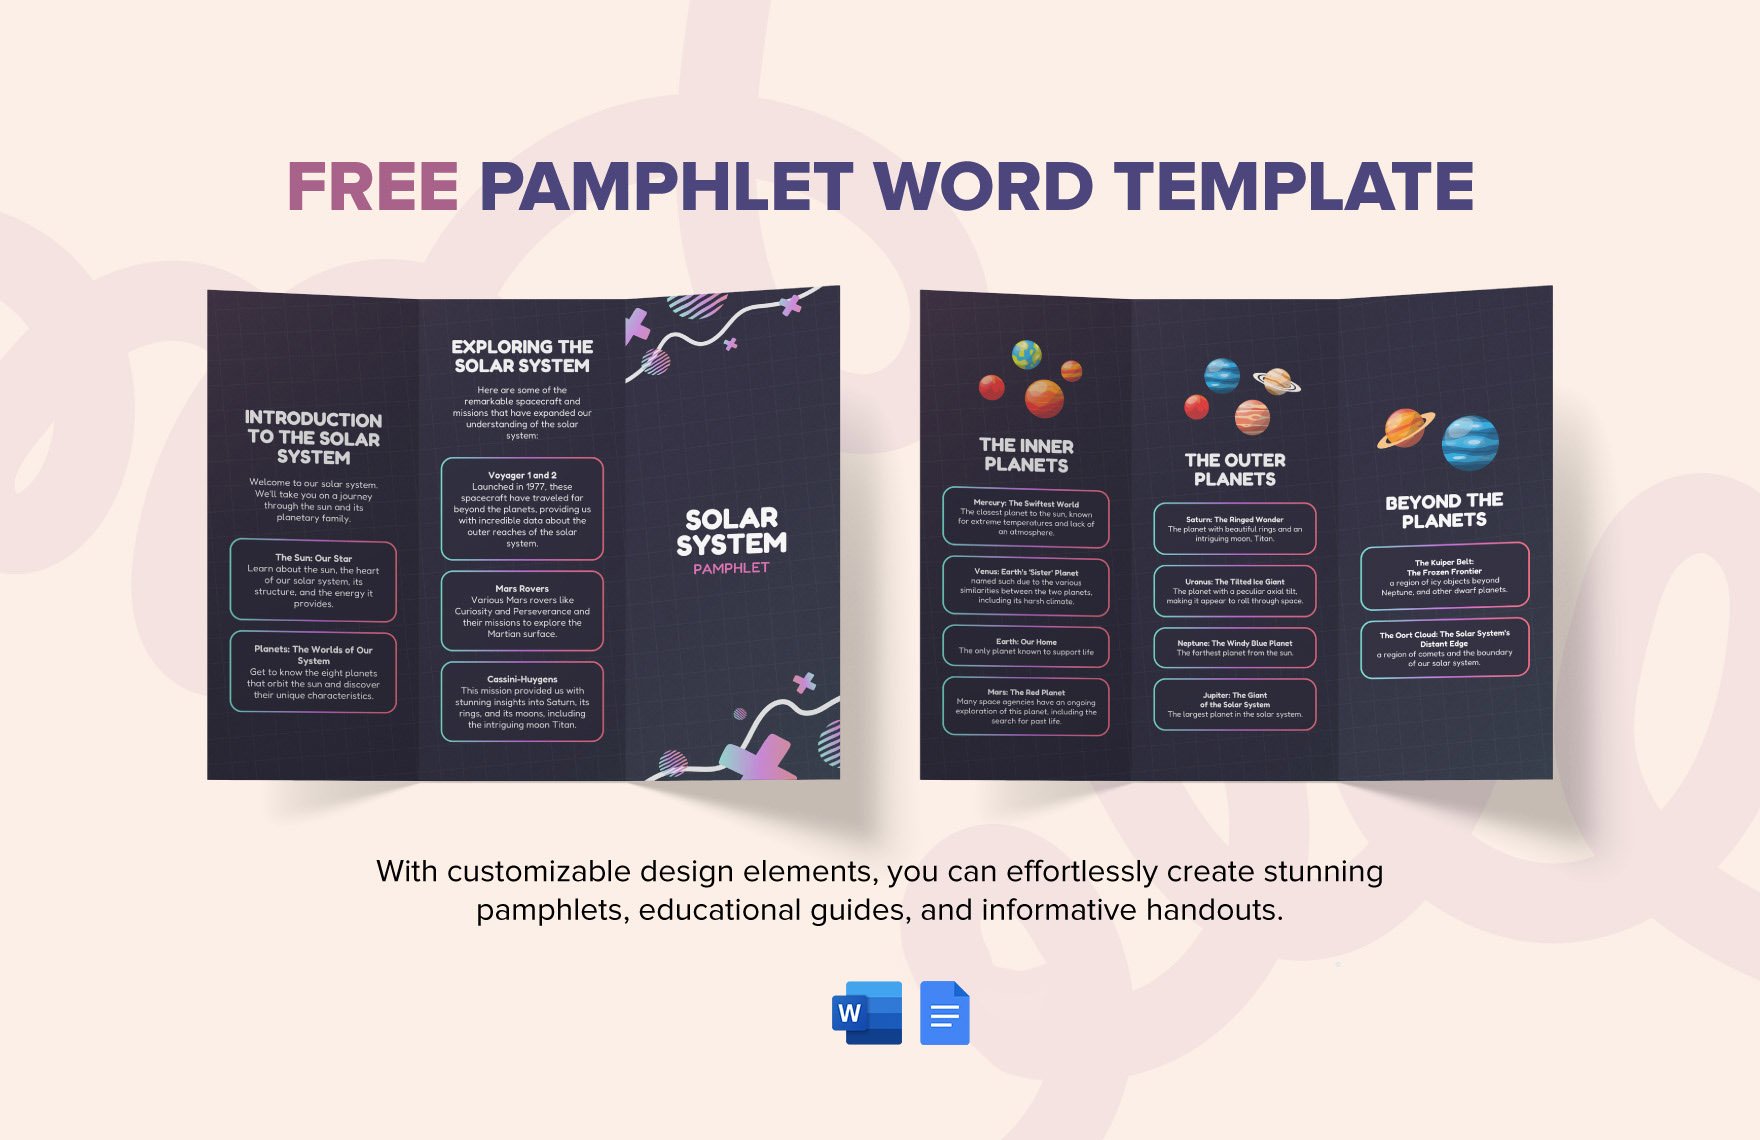 Pamphlet Word Template